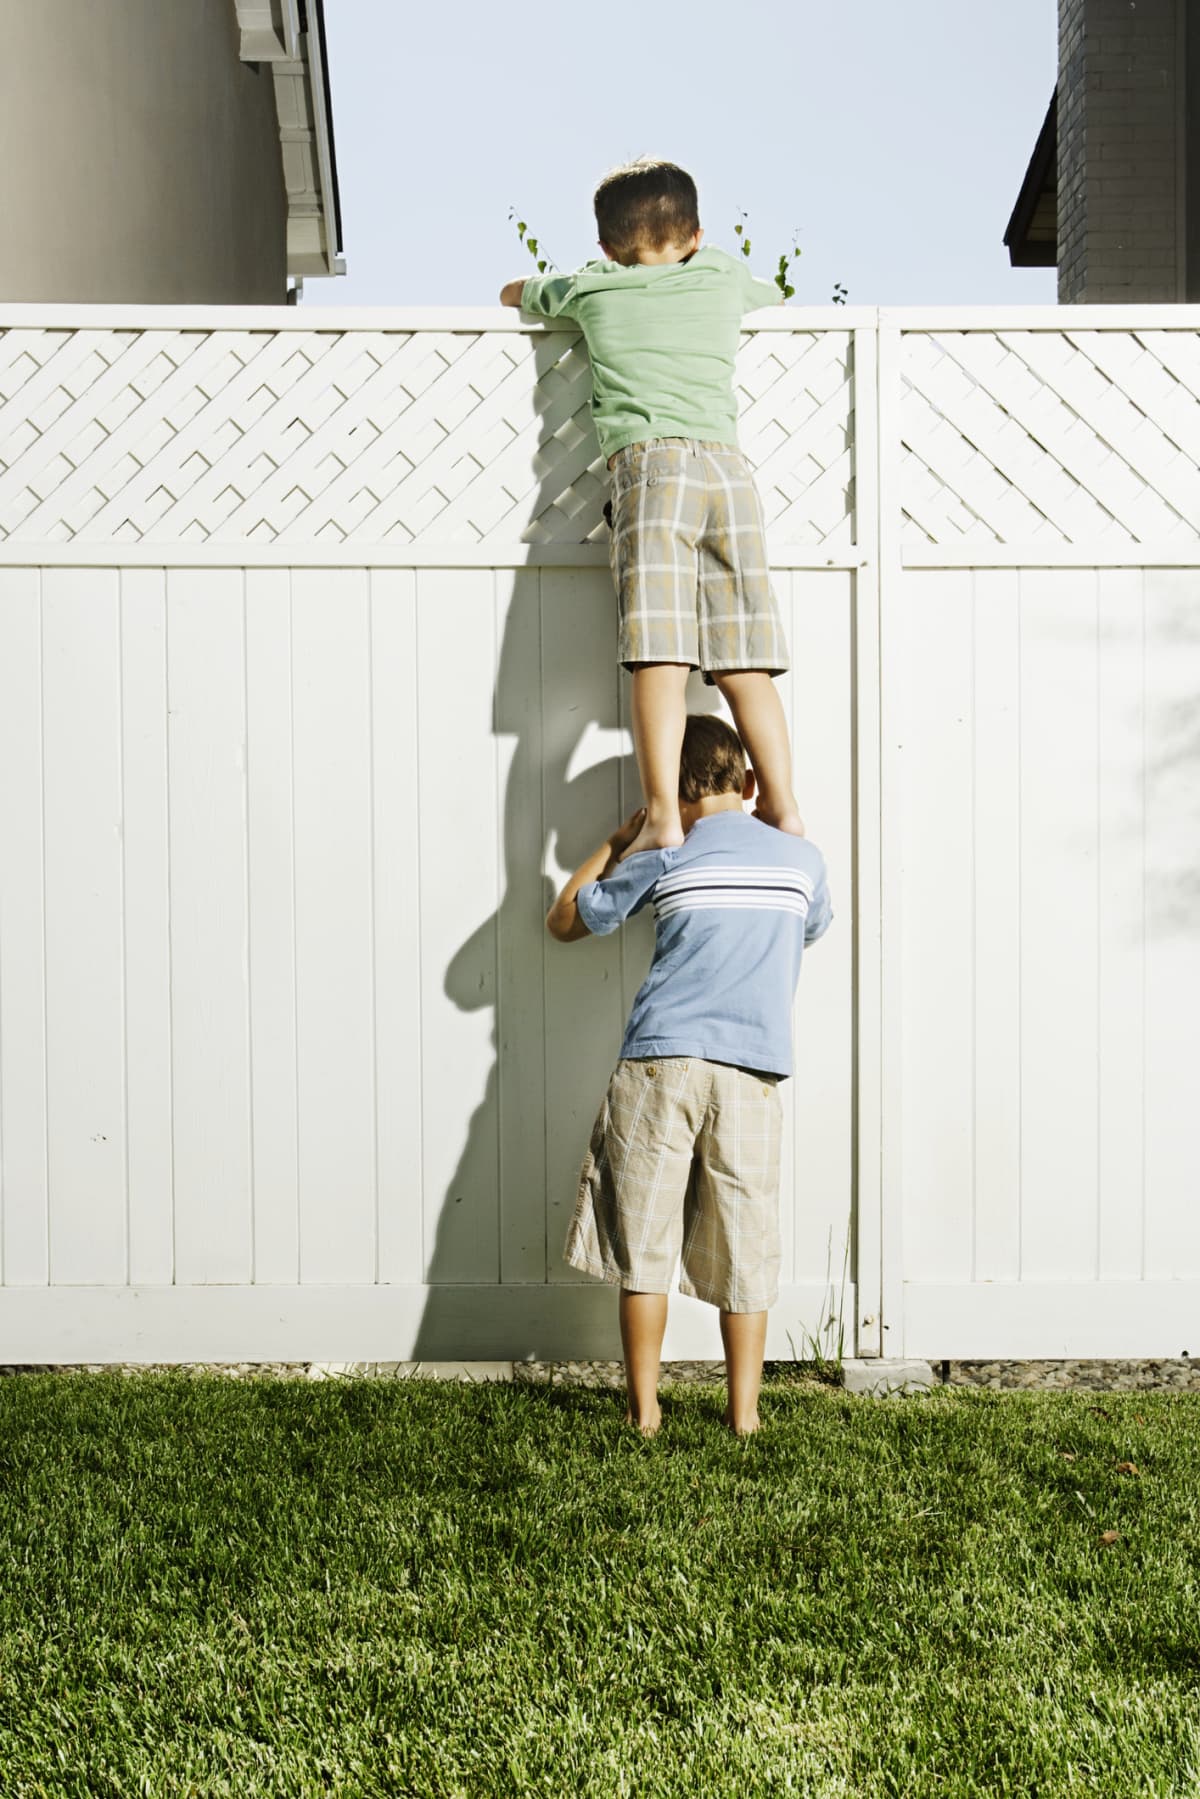 Two boys climbing over white privacy fence in yard